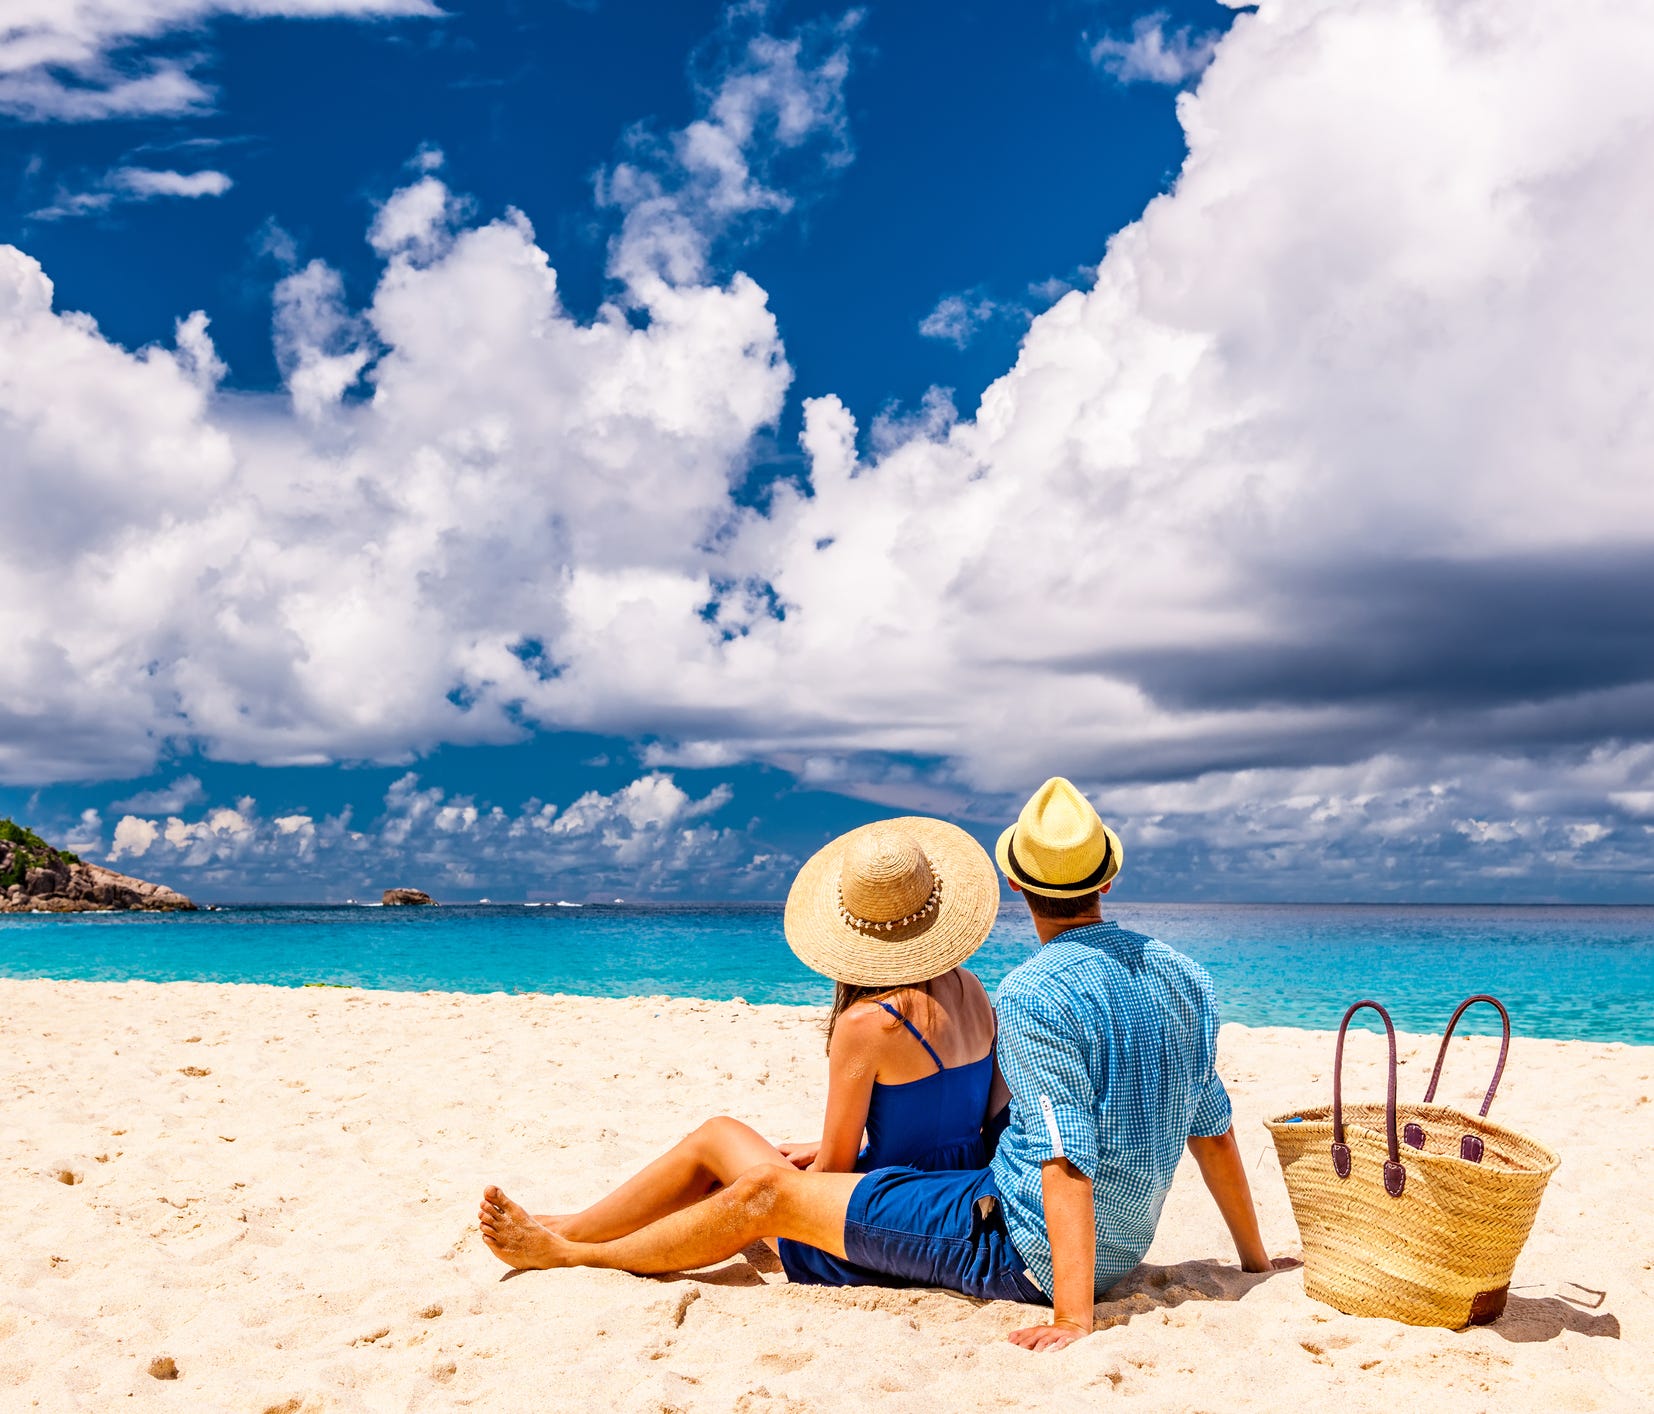 If you want the perfect summer vacation, consider hiring a travel agent.